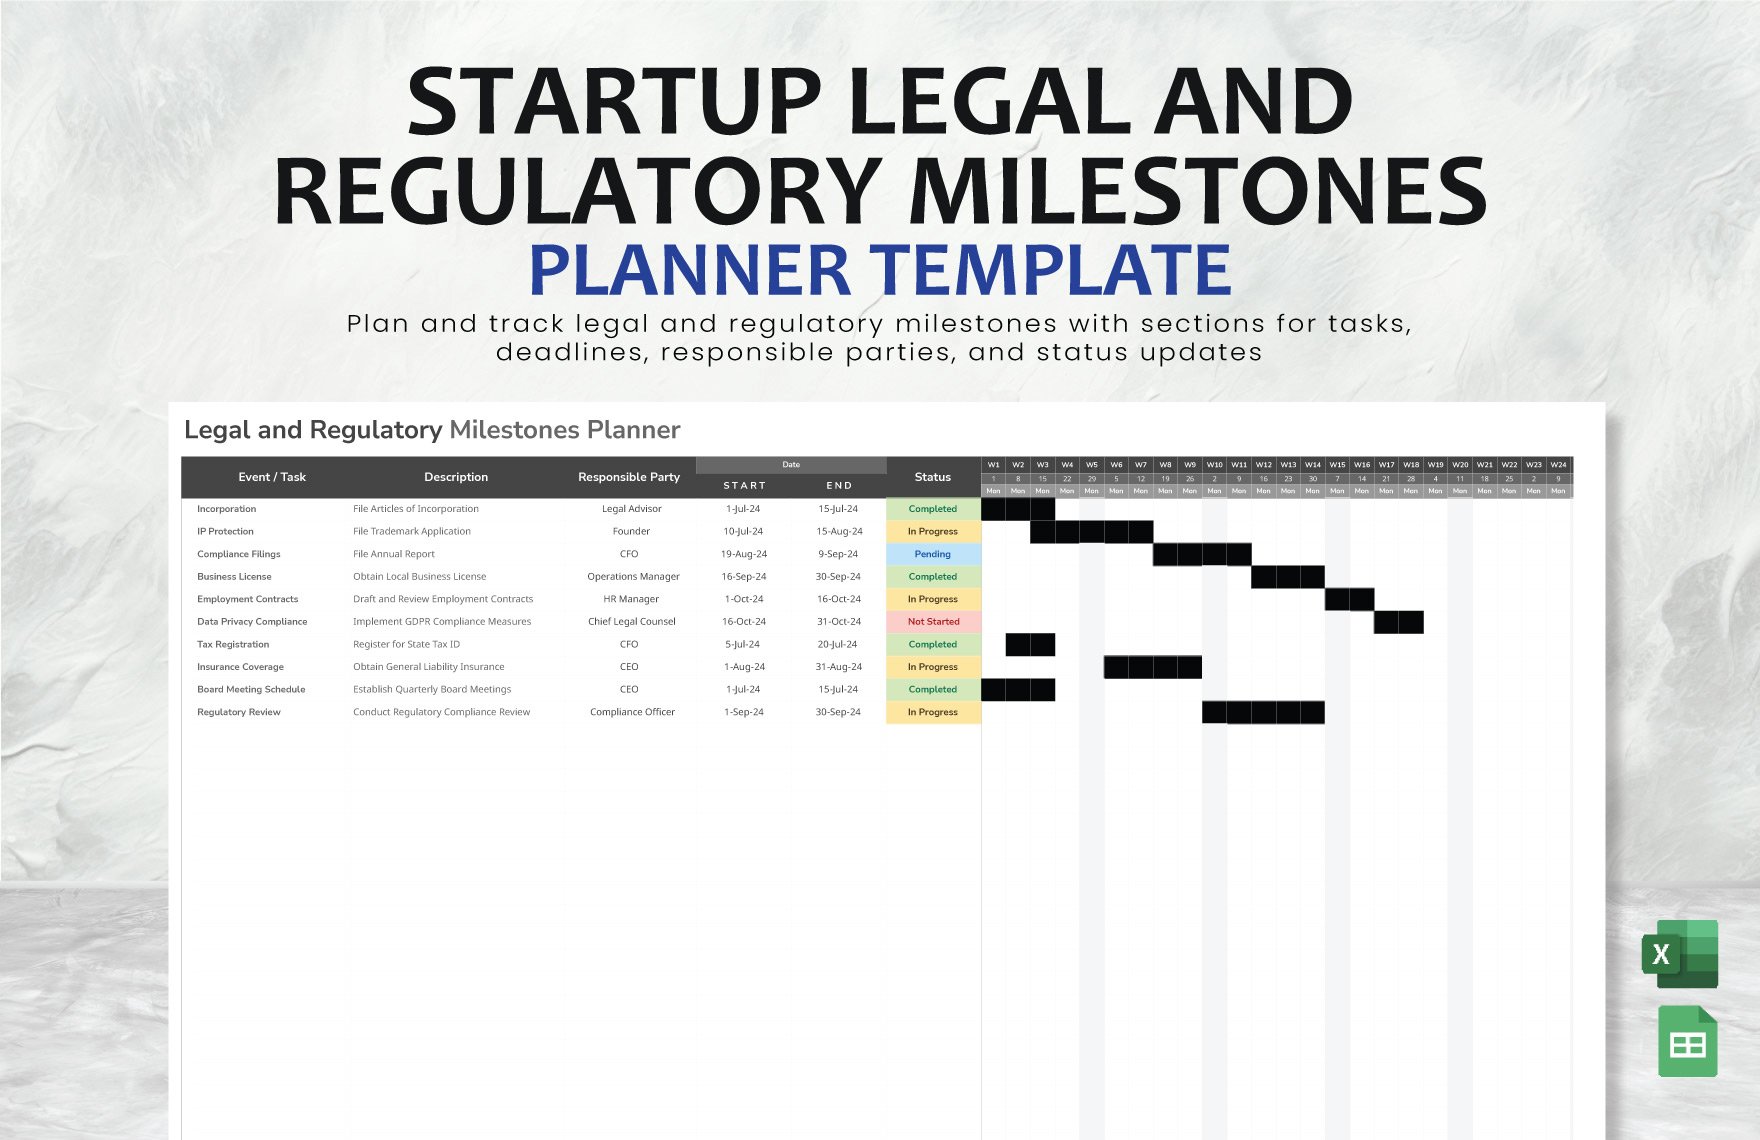 Startup Legal and Regulatory Milestones Planner Template in Excel, Google Sheets